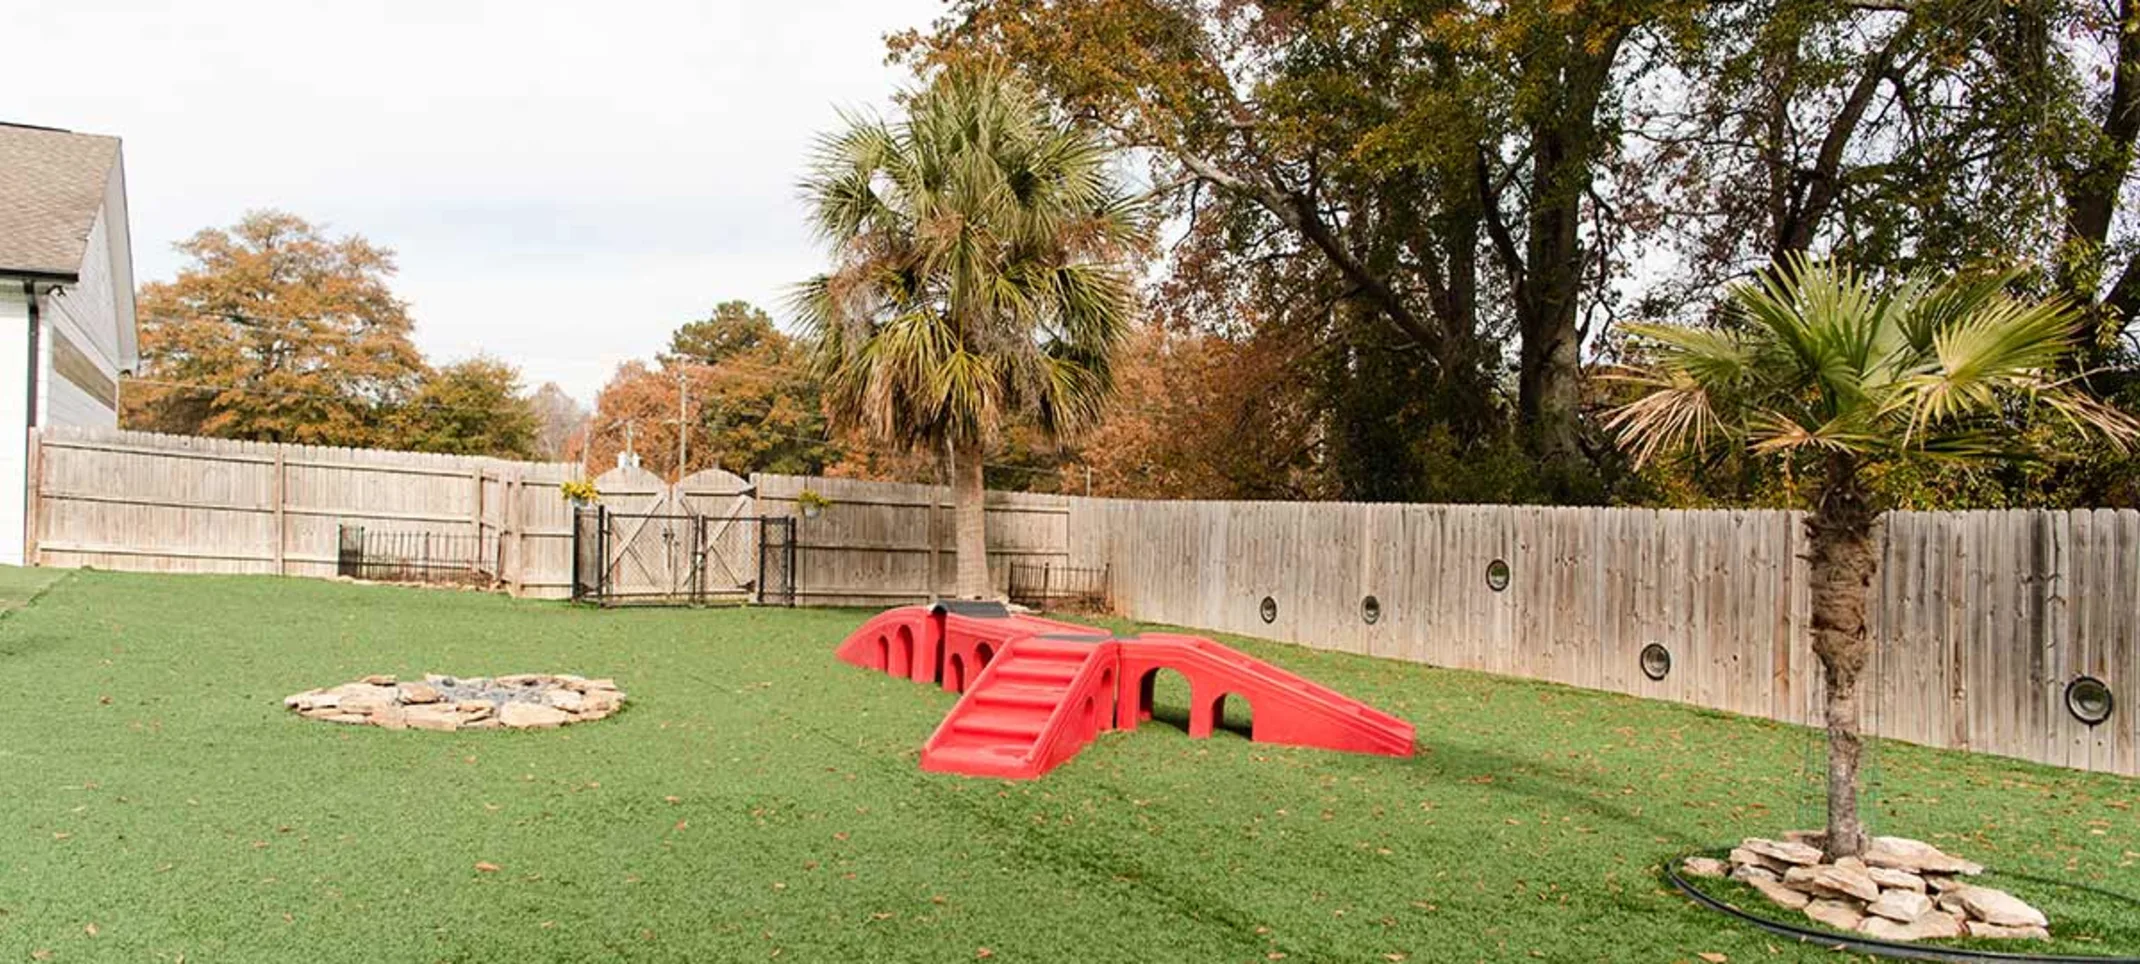 AMC Tuscaloosa Club Mutts Doggy Daycare Outdoor space